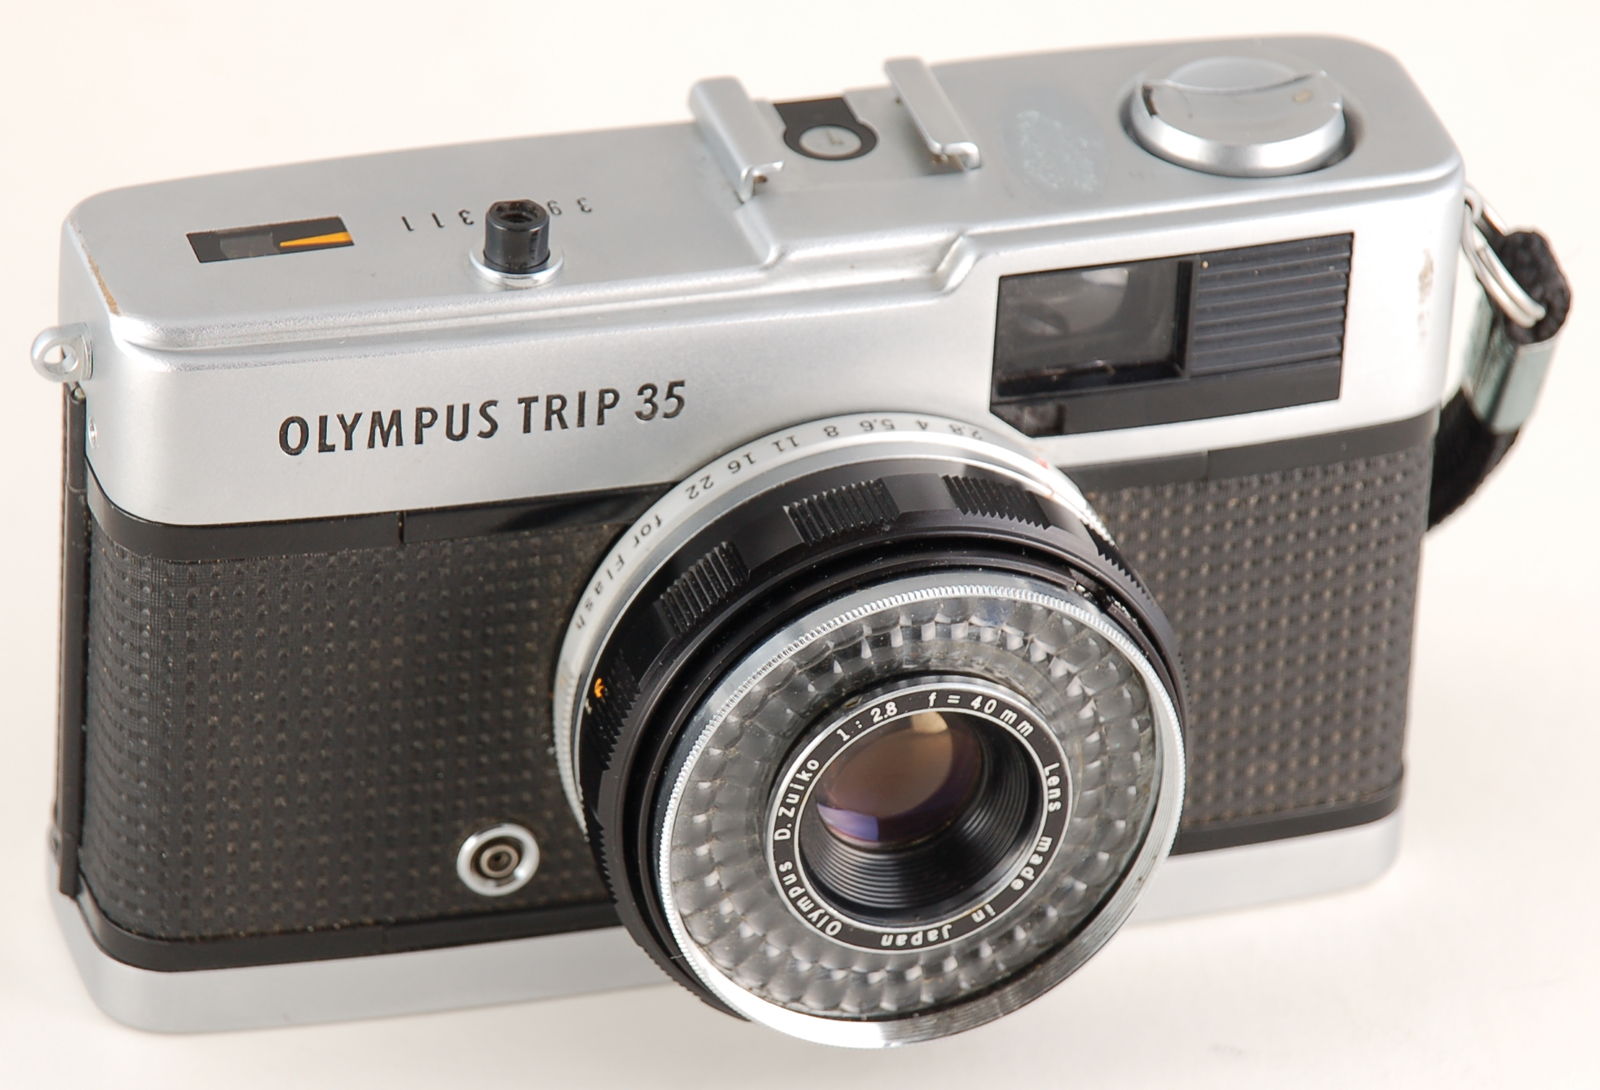 Olympus Trip 35 photo by Marc Lacoste on Wikipedia